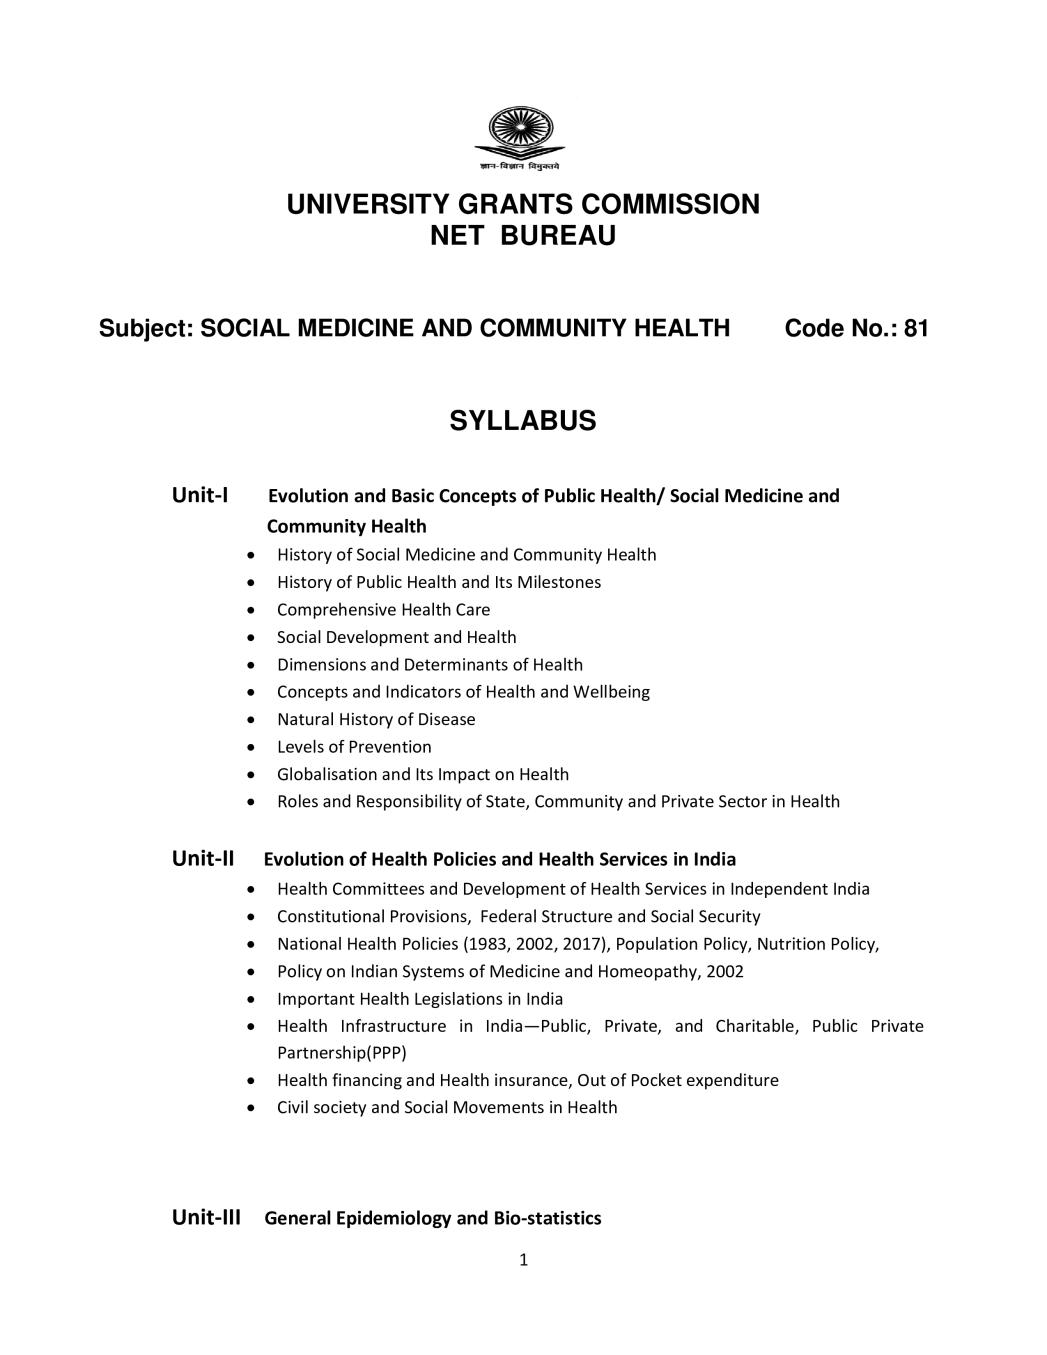 UGC NET Syllabus for Social Medicine  and Community Health 2020 - Page 1